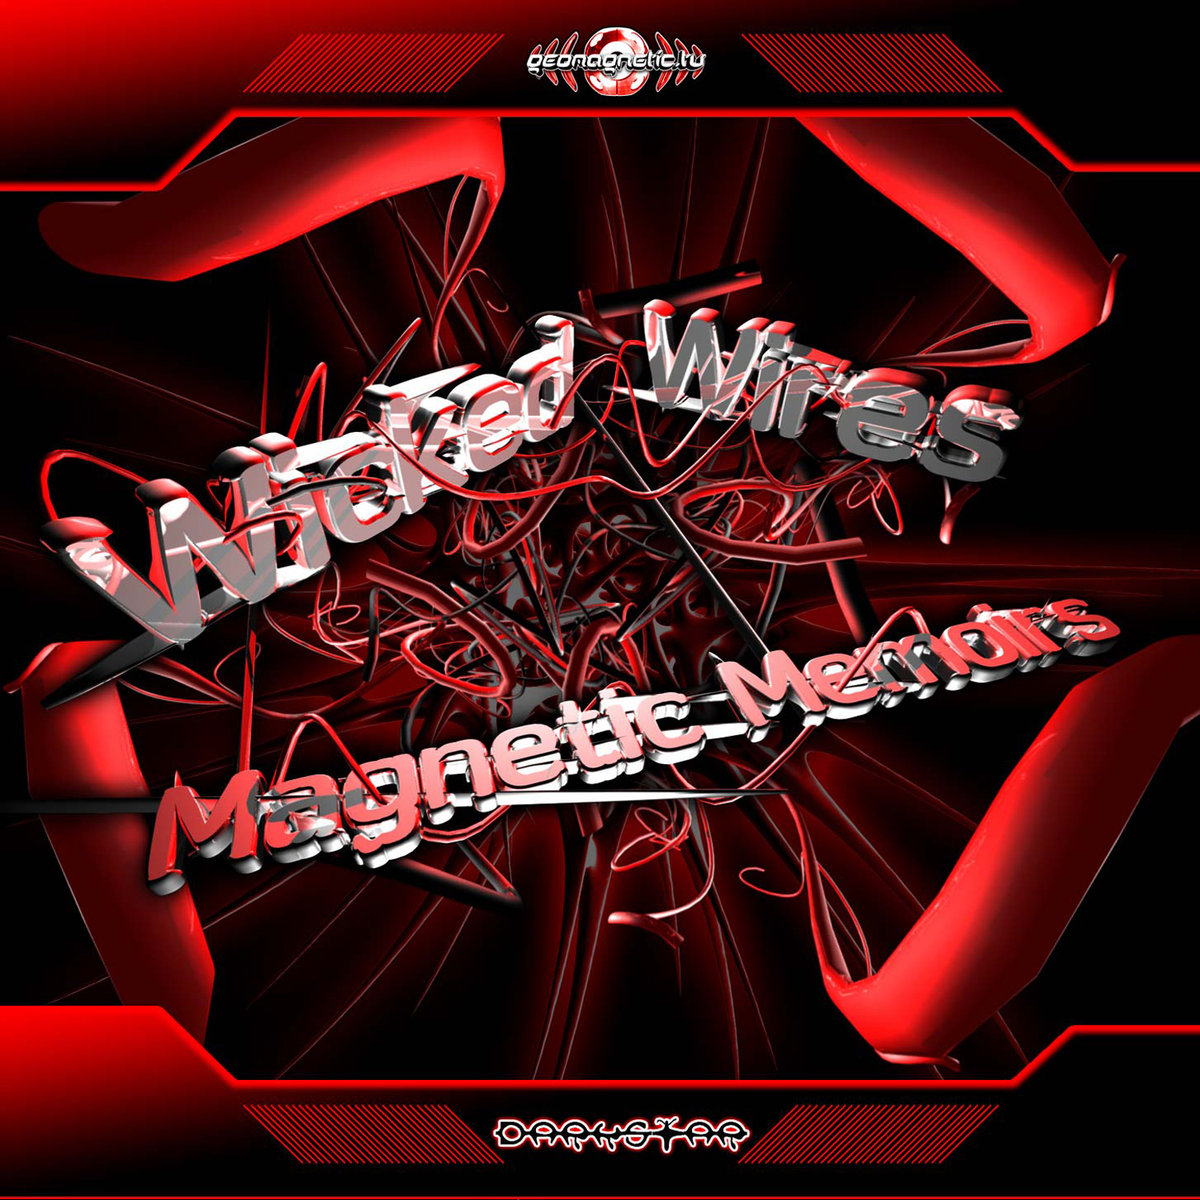 Wicked Wires - Magnetic Memoirs